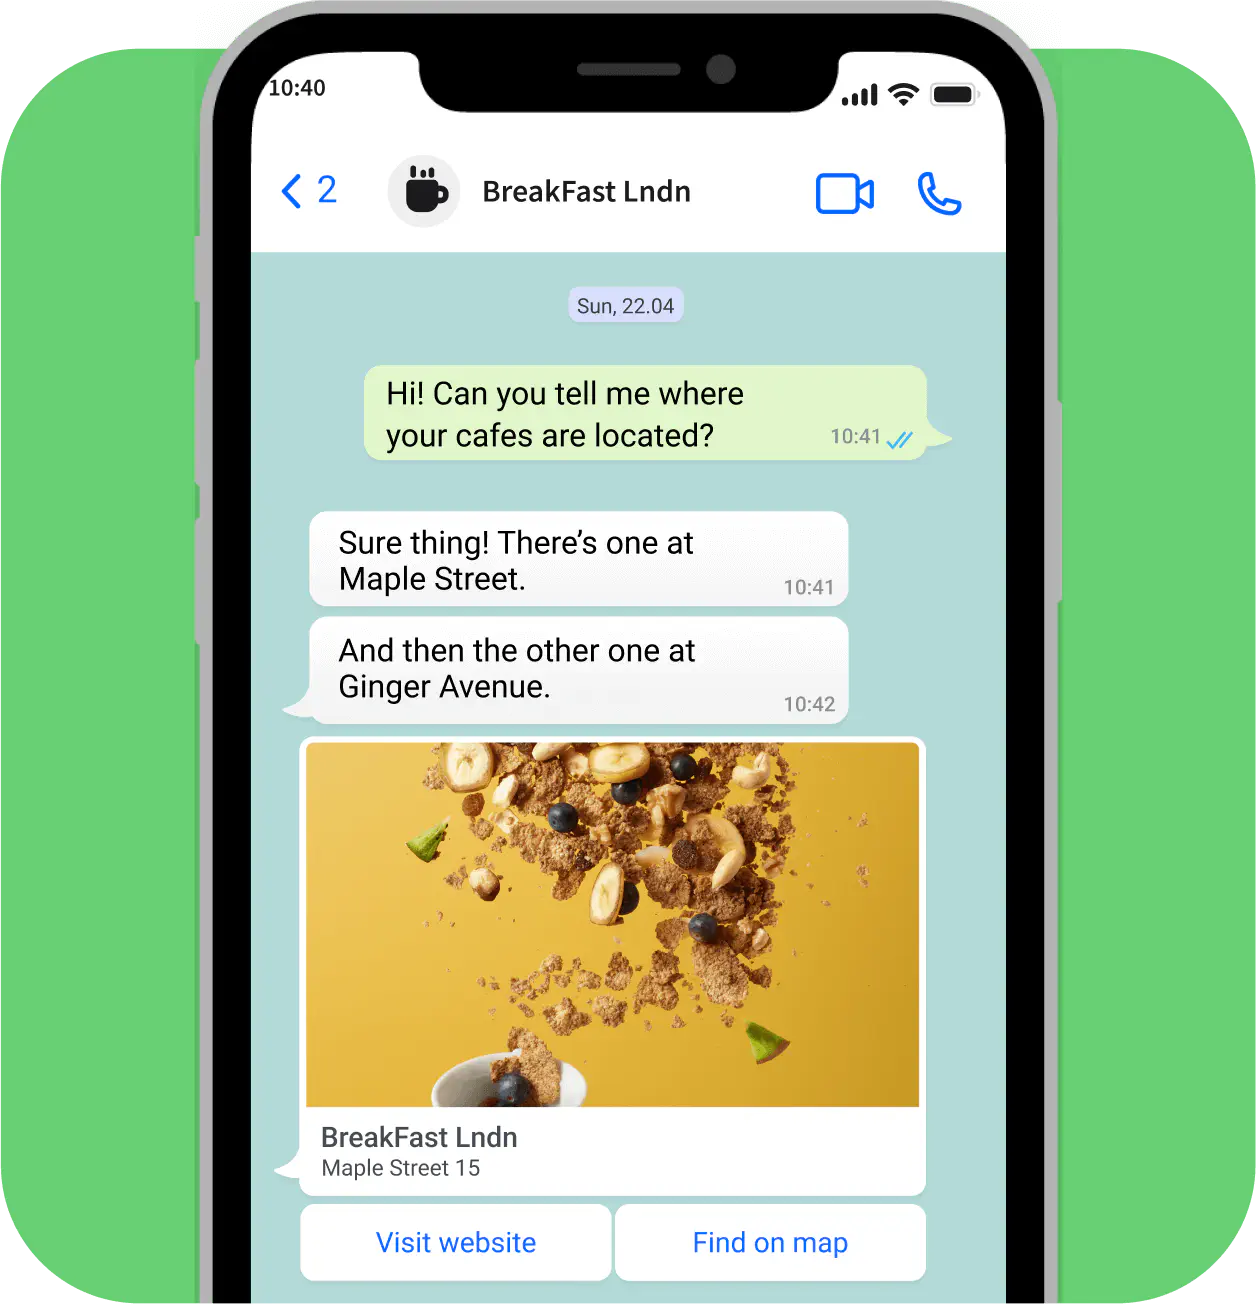 LiveChat’s integration with WhatsApp, showcasing global connectivity